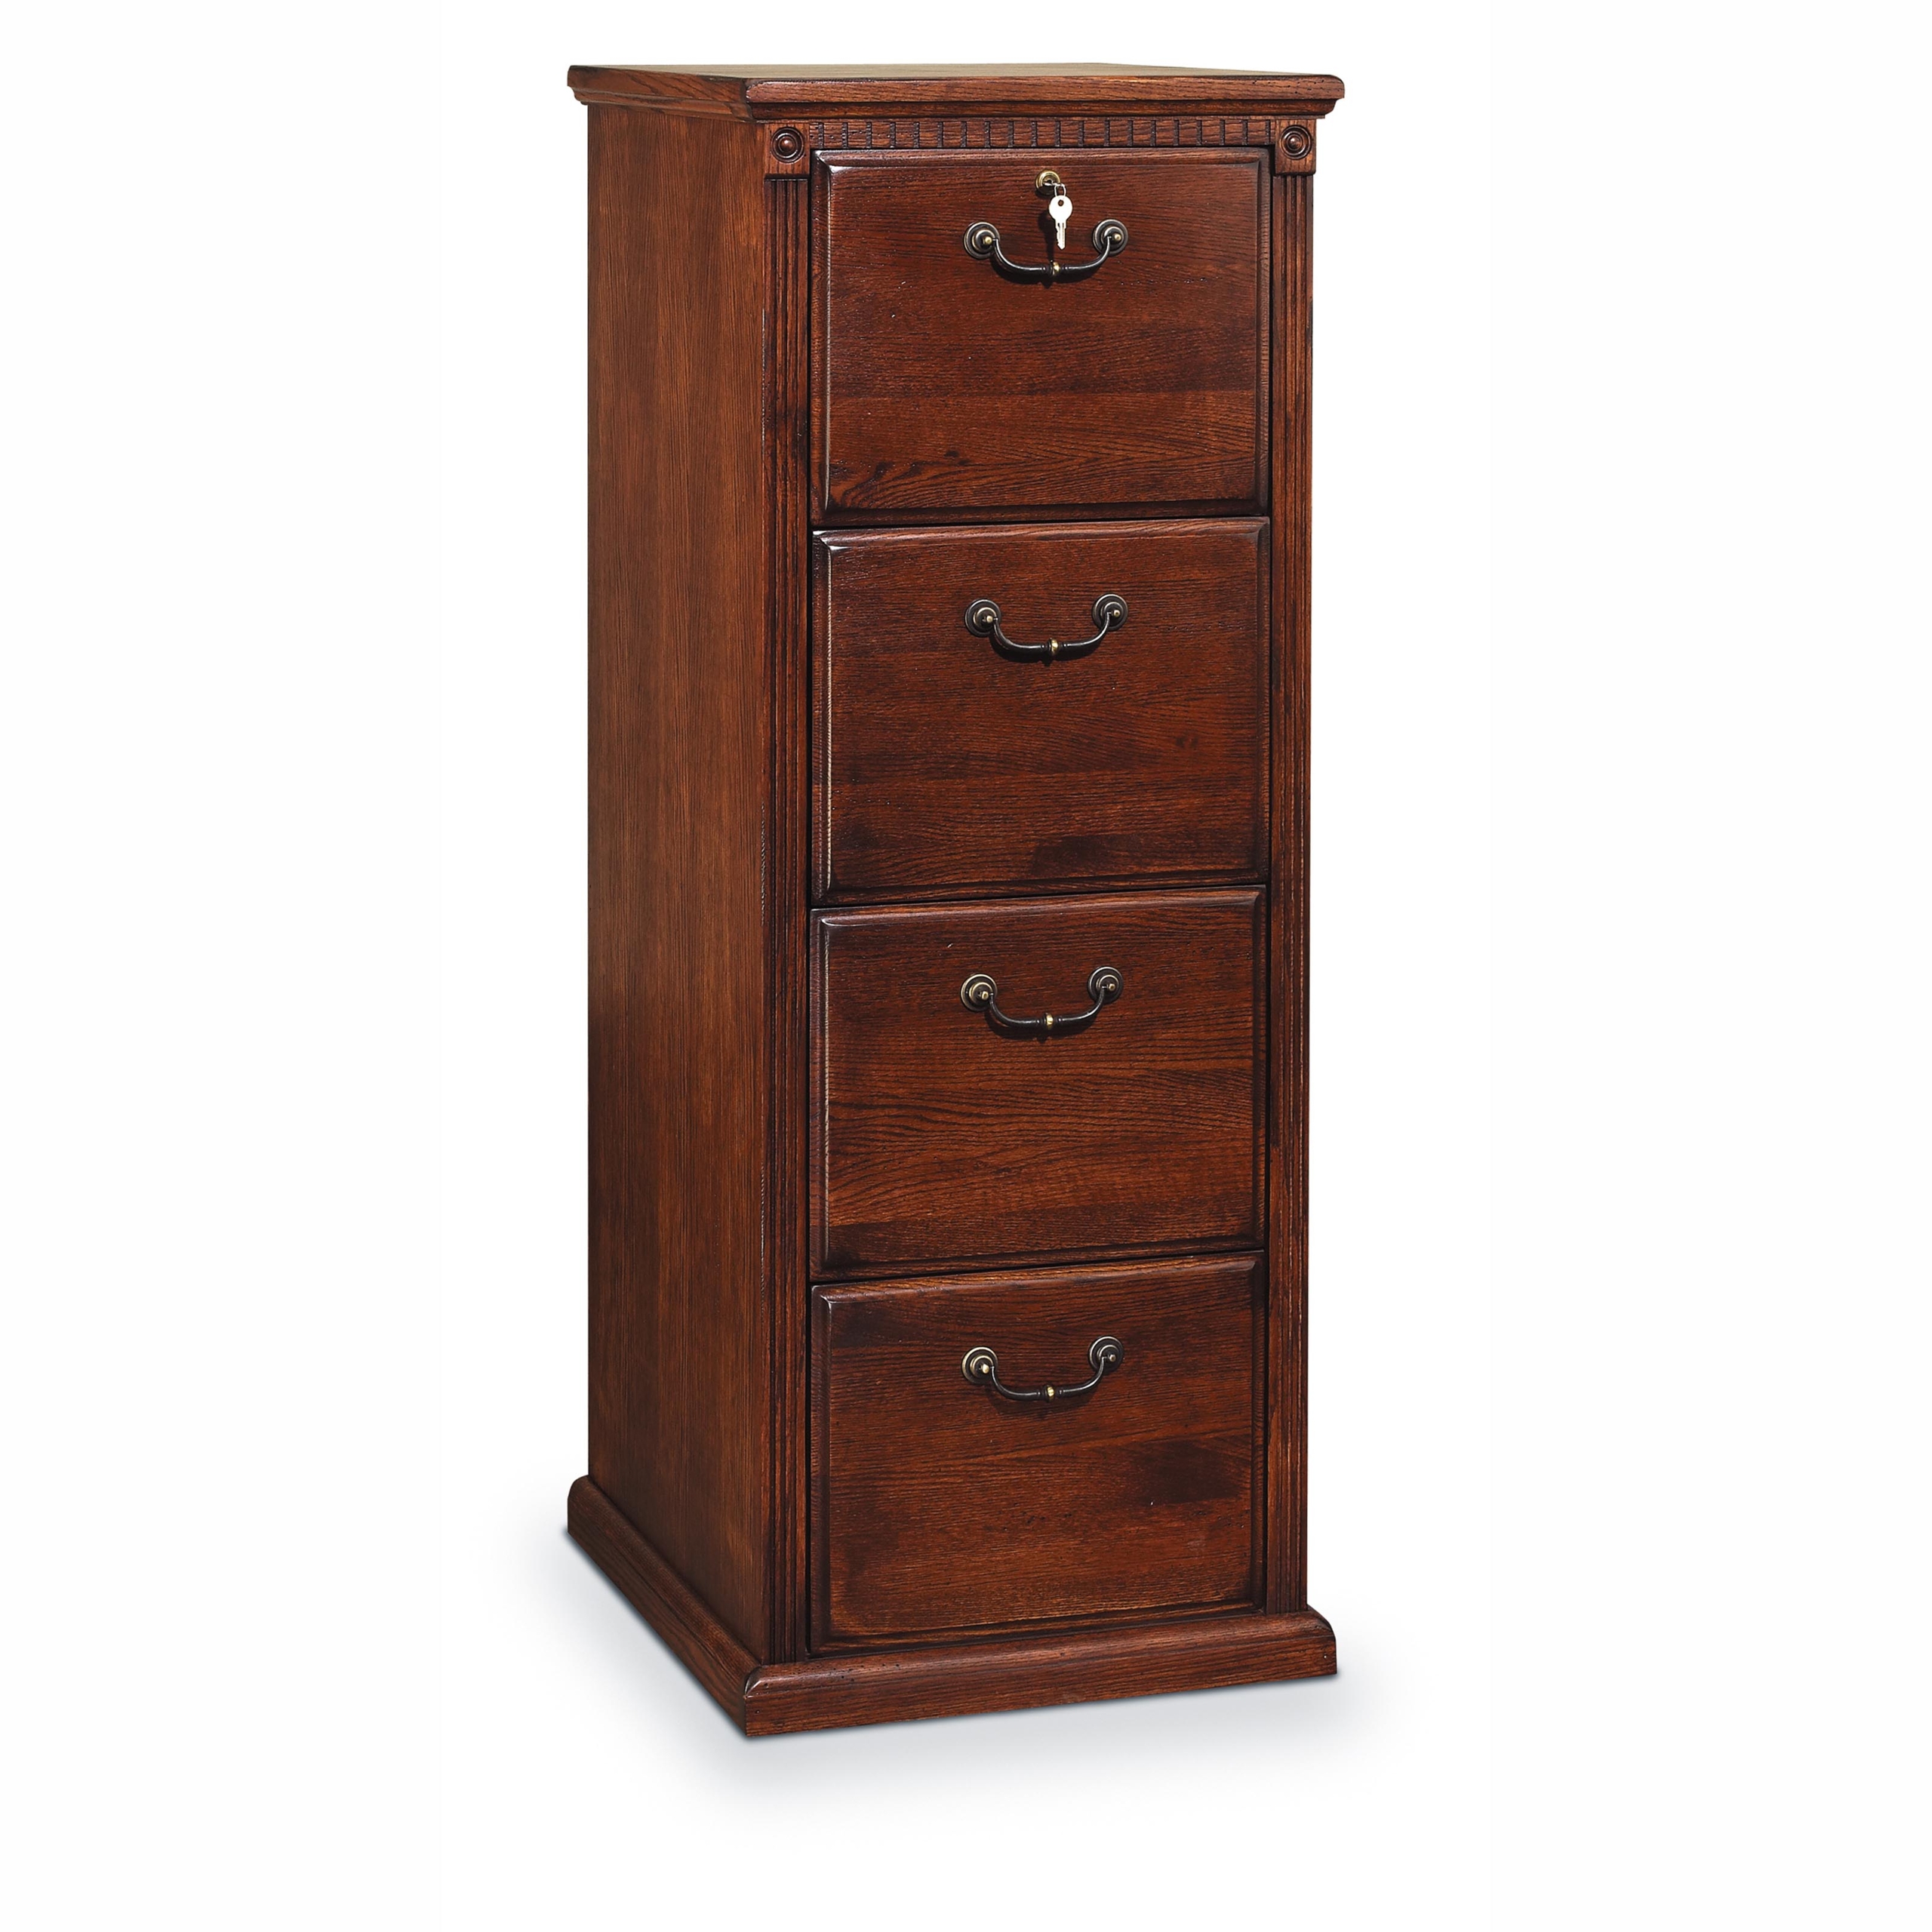 Solid wood filing cabinet 2